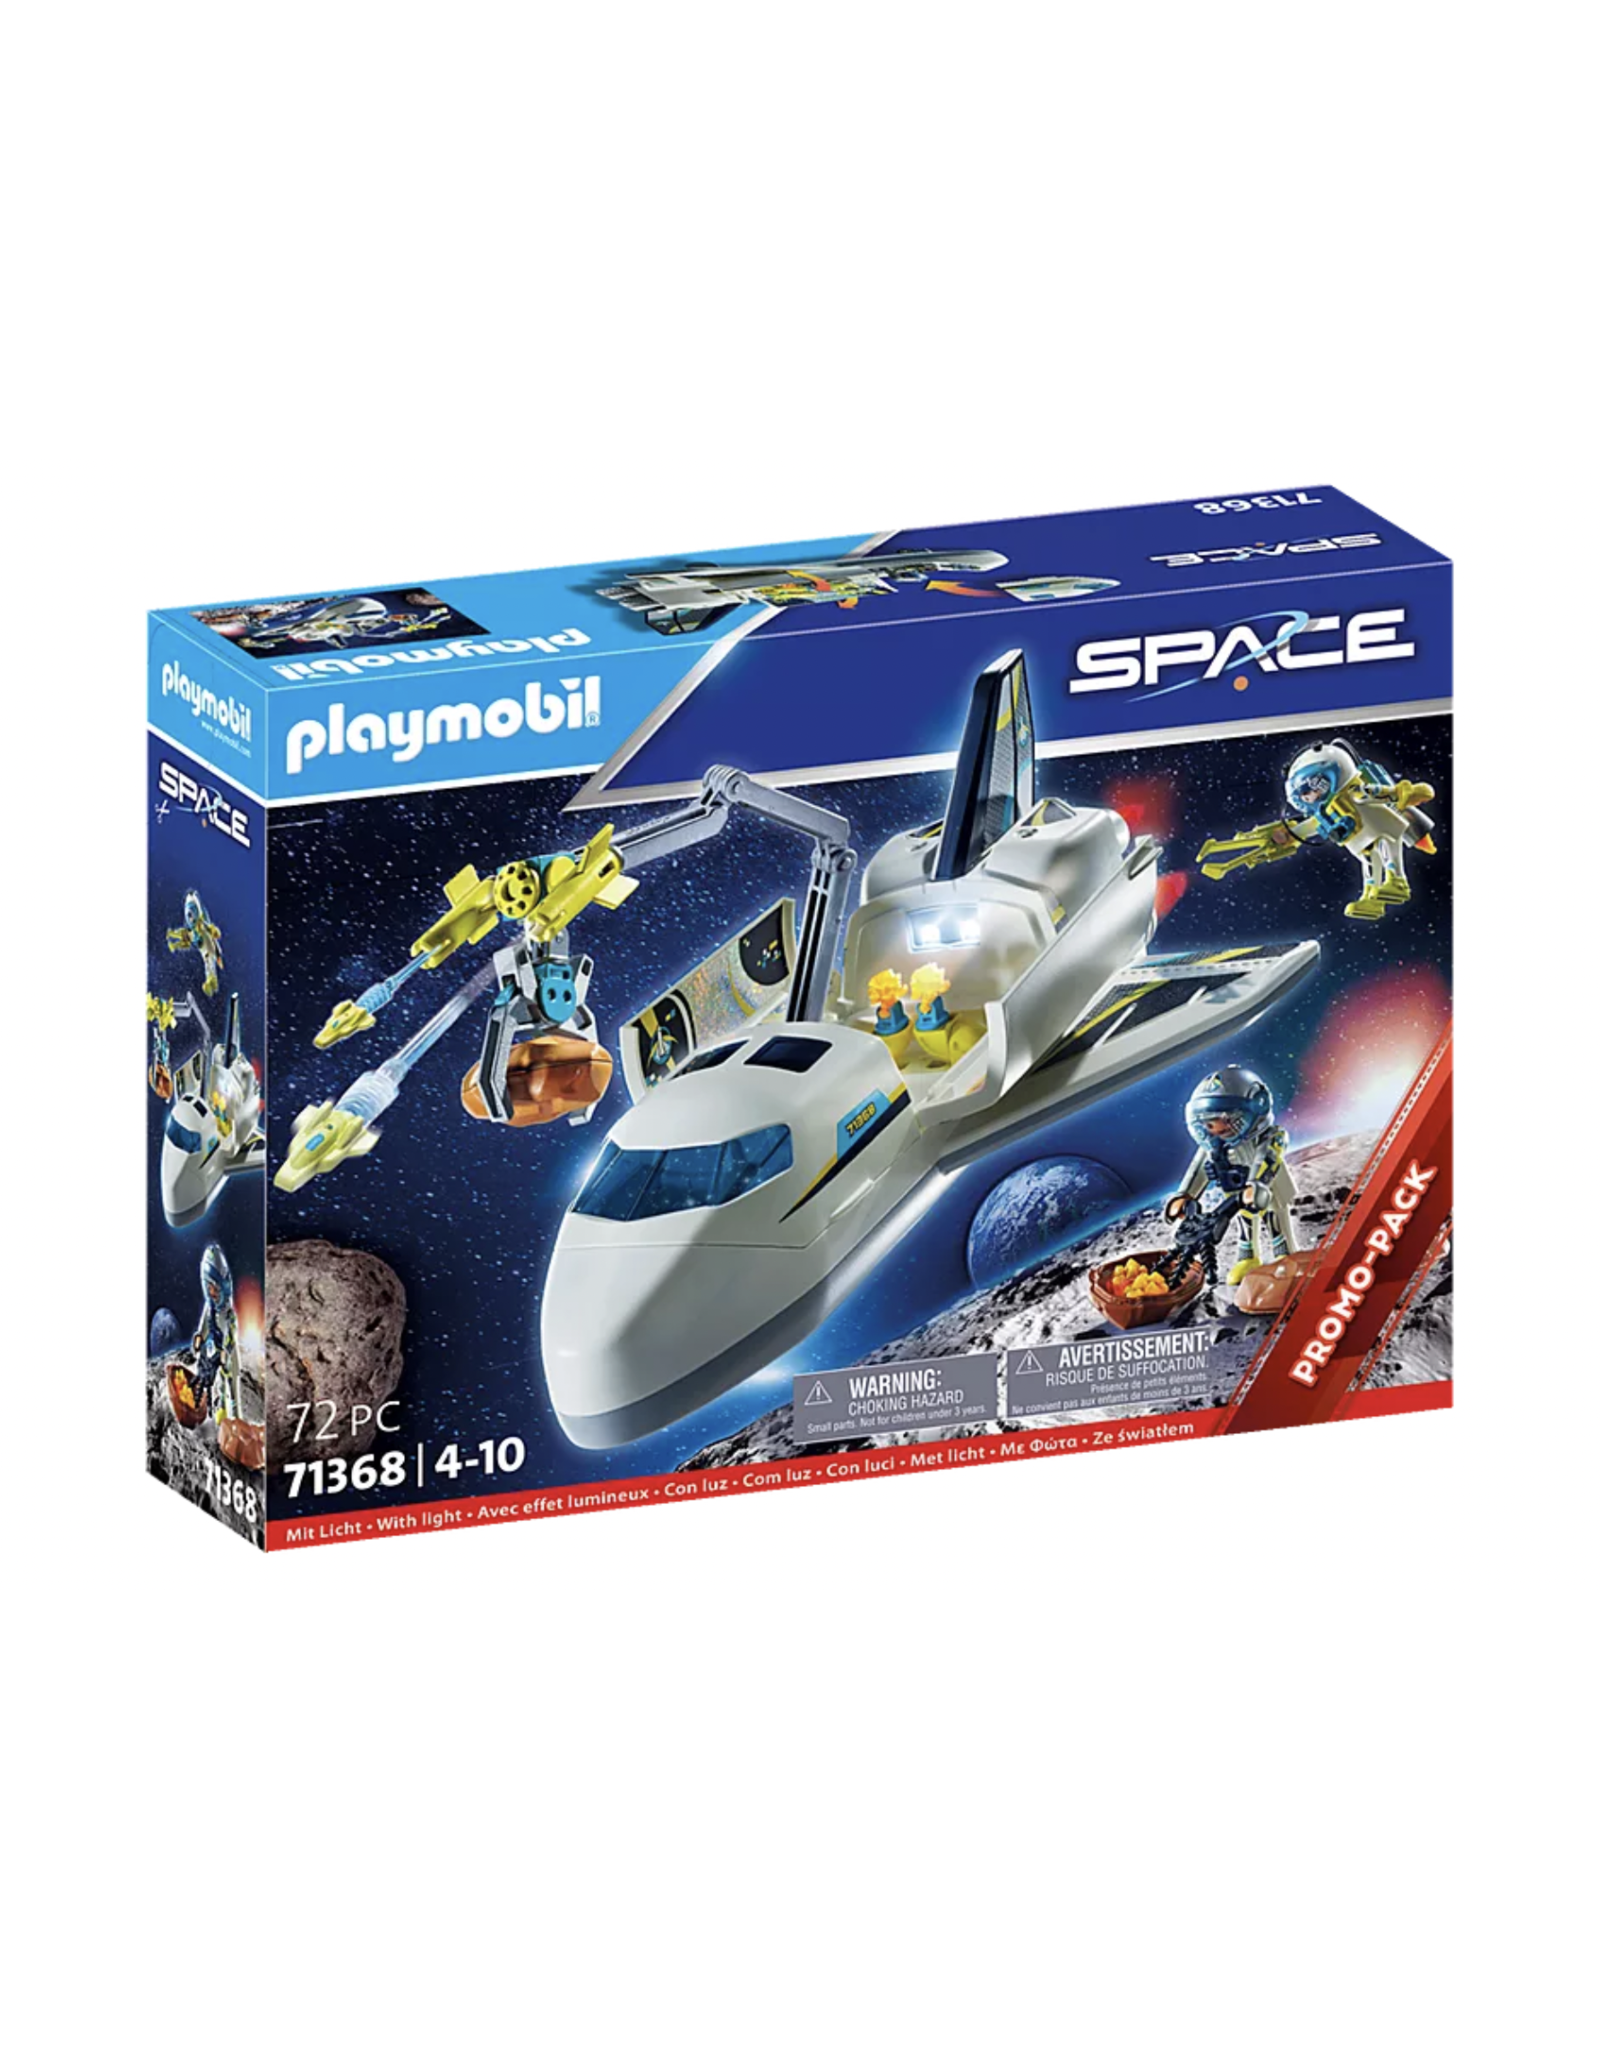 Space Shuttle - Playmobil Space 9805